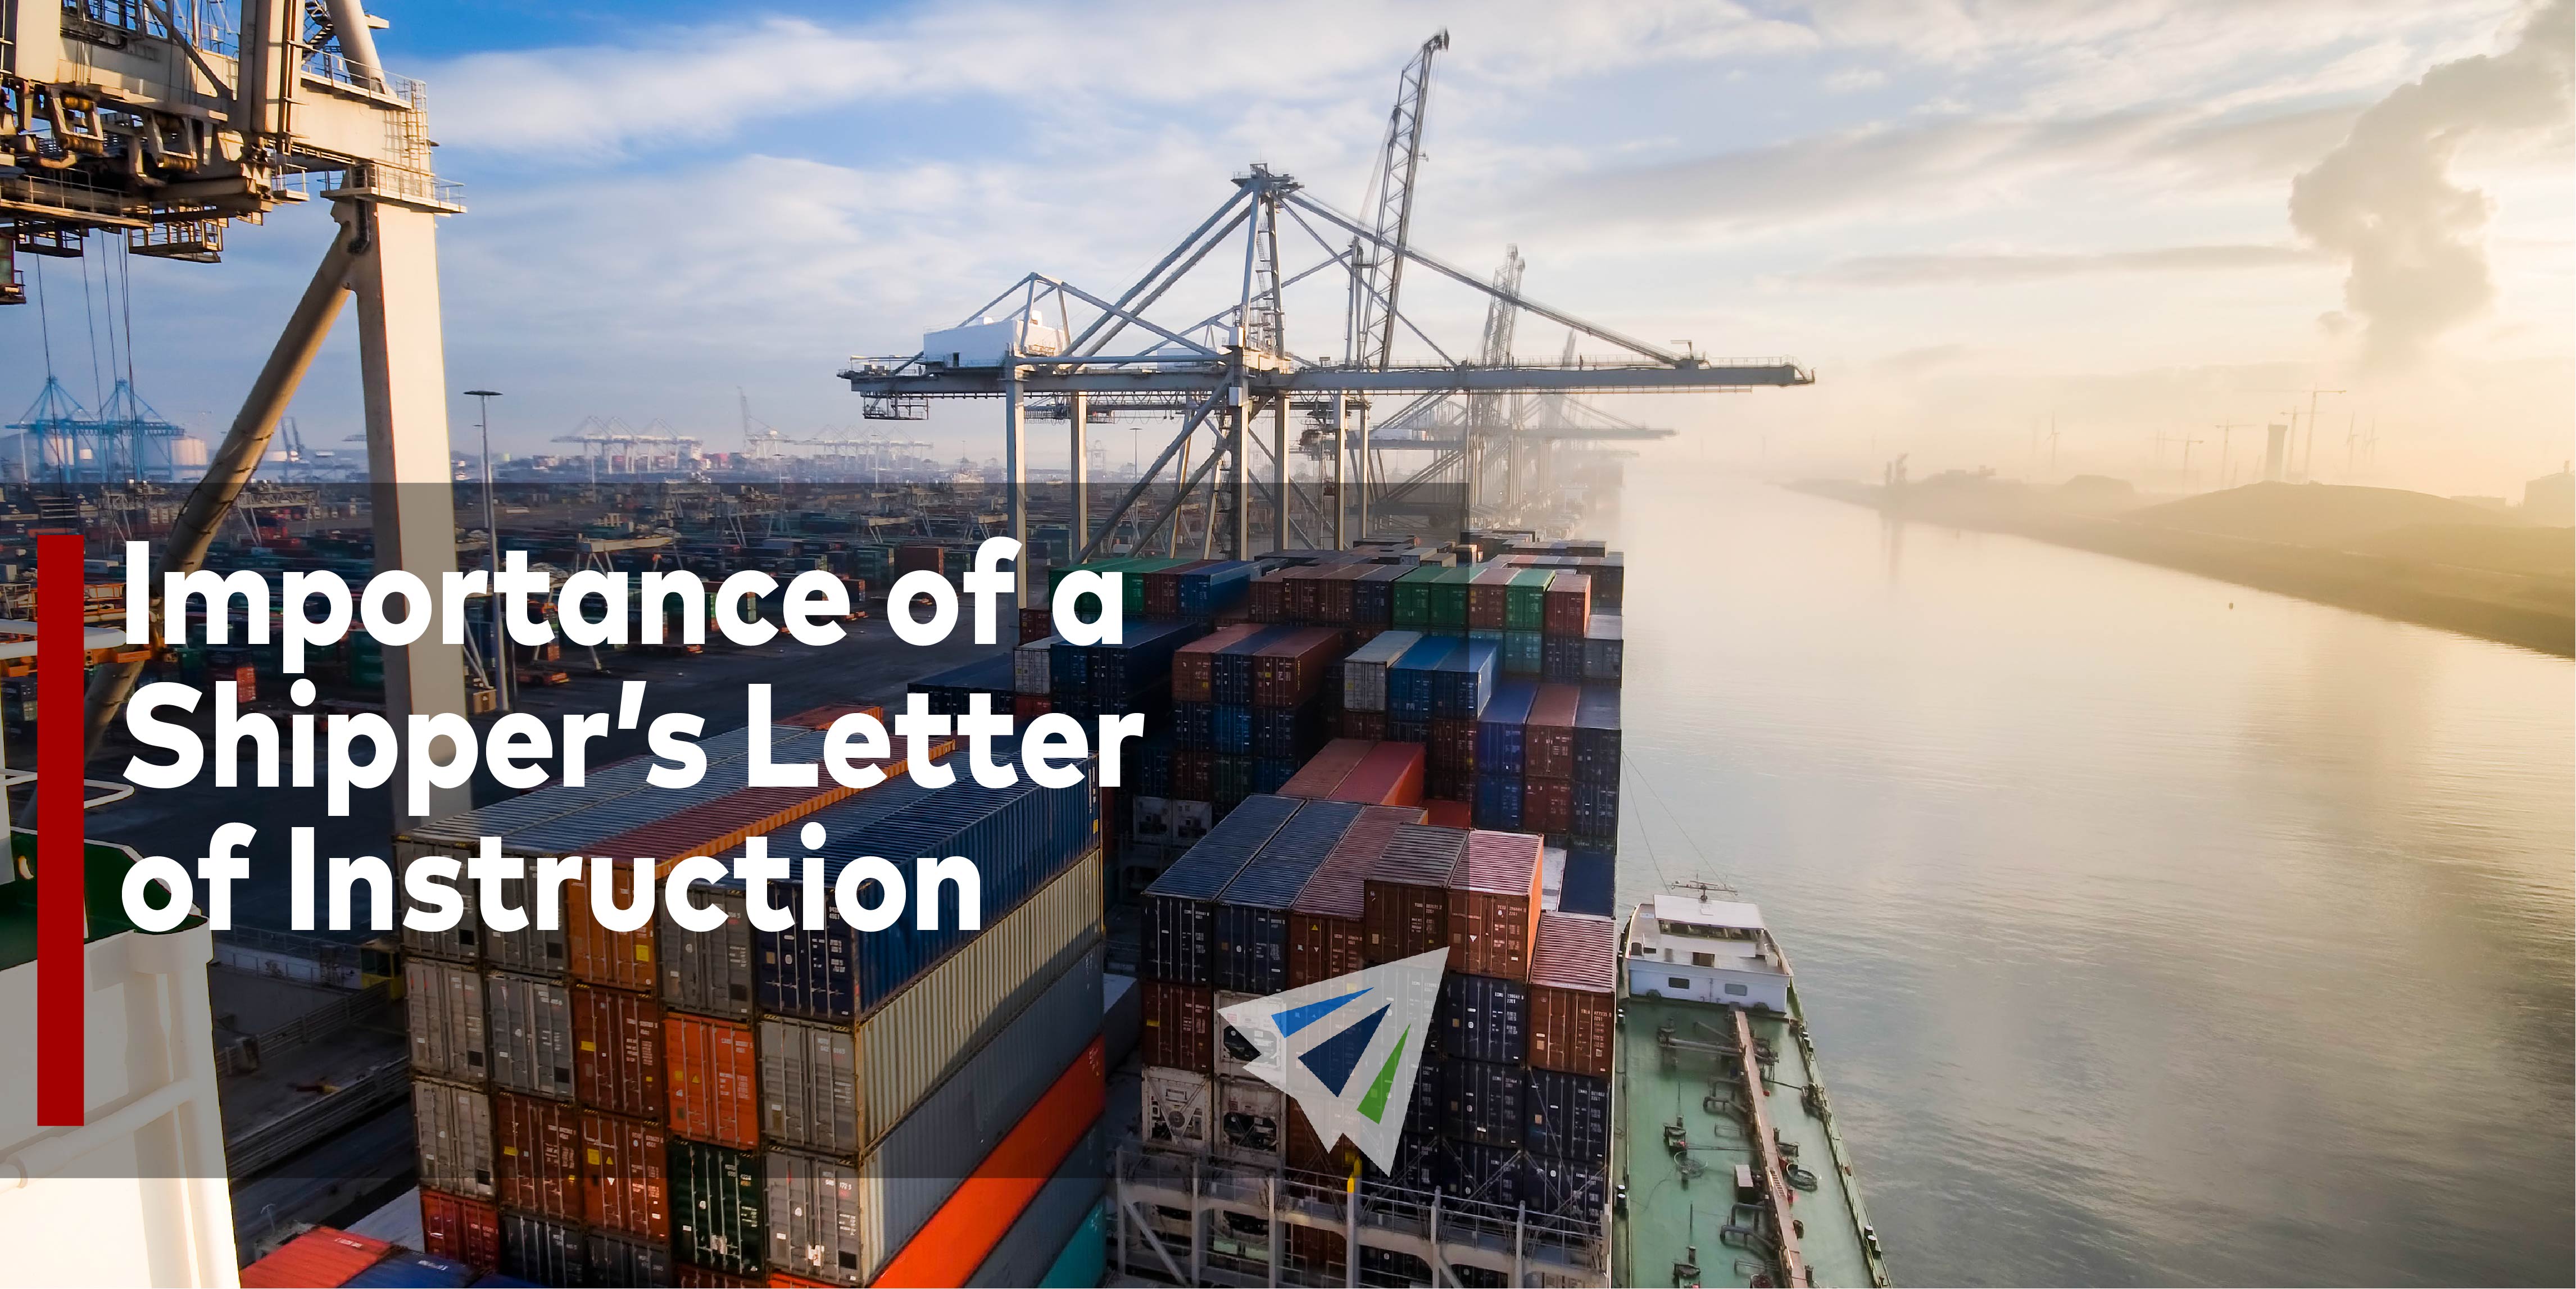 Importance of a Shipper's Letter on Instruction